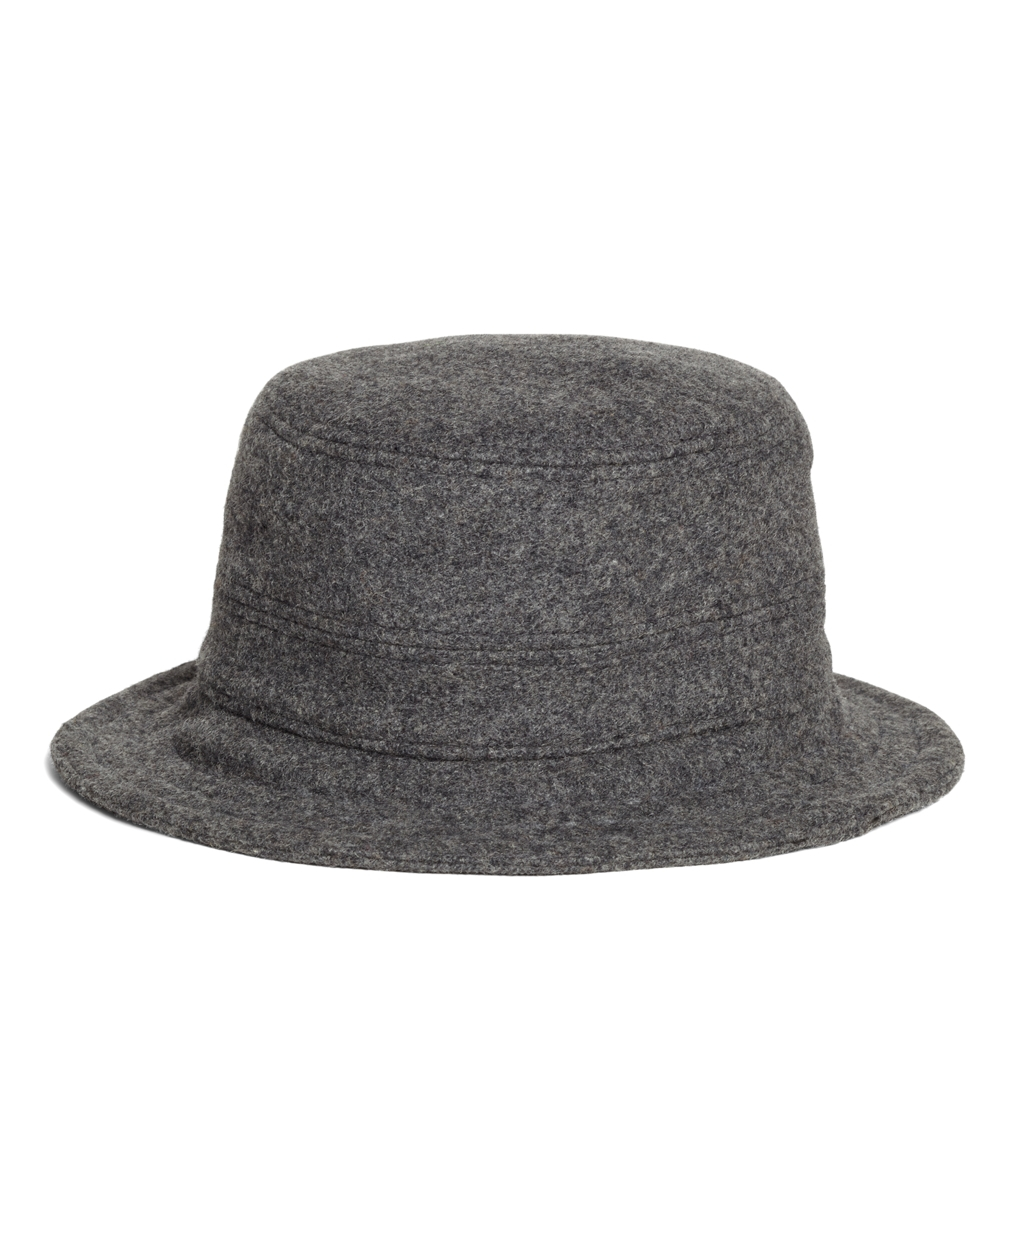 Brooks Brothers Wool Bucket Hat in Gray for Men - Lyst